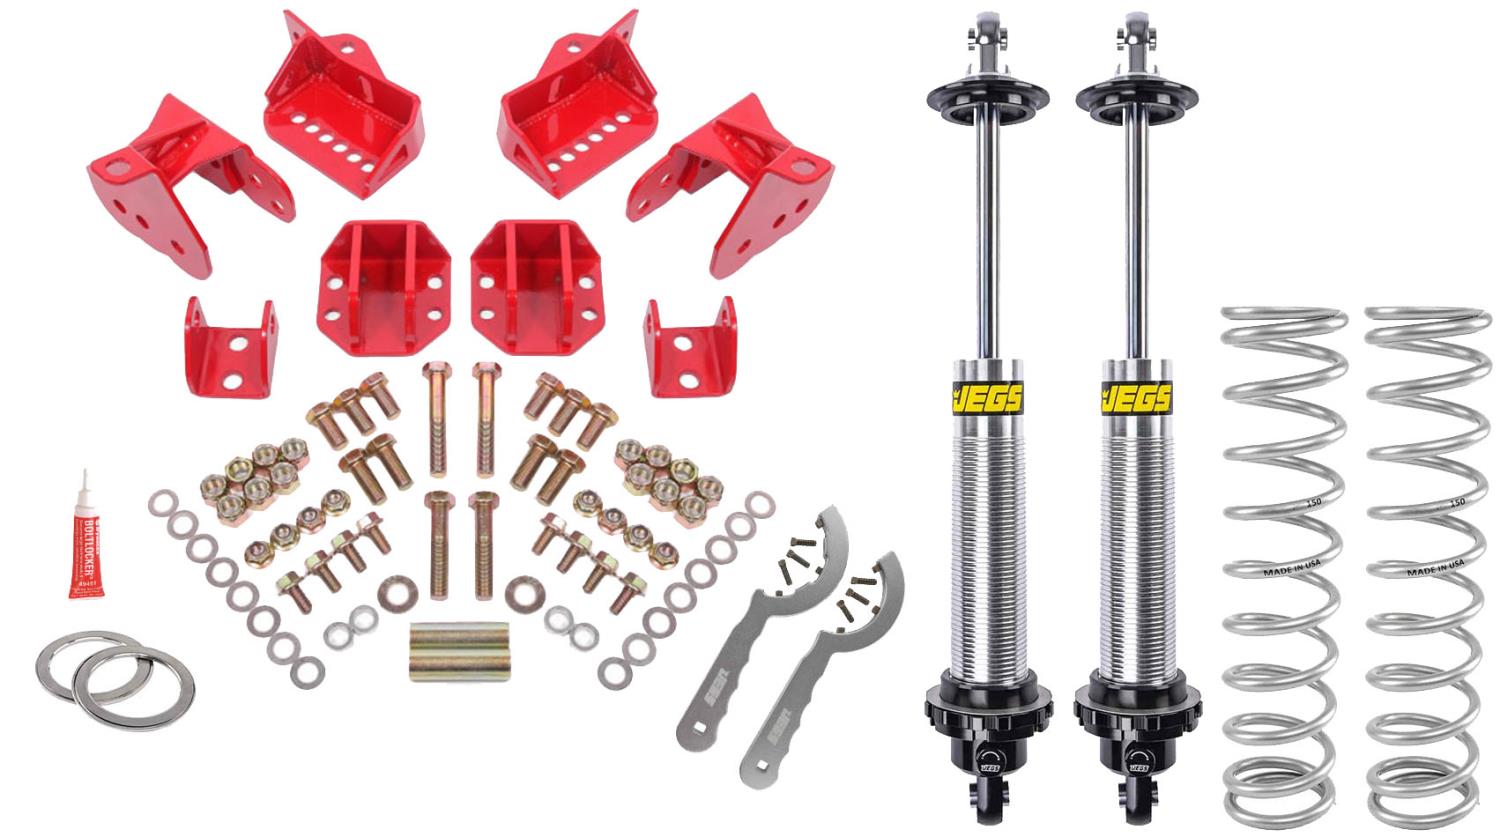 Rear Coil-Over Conversion Kit w/ Lower Control Arm Brackets, Single-Adjustable Shocks, 1964-72 GM A-Body - Red Powder-Coated